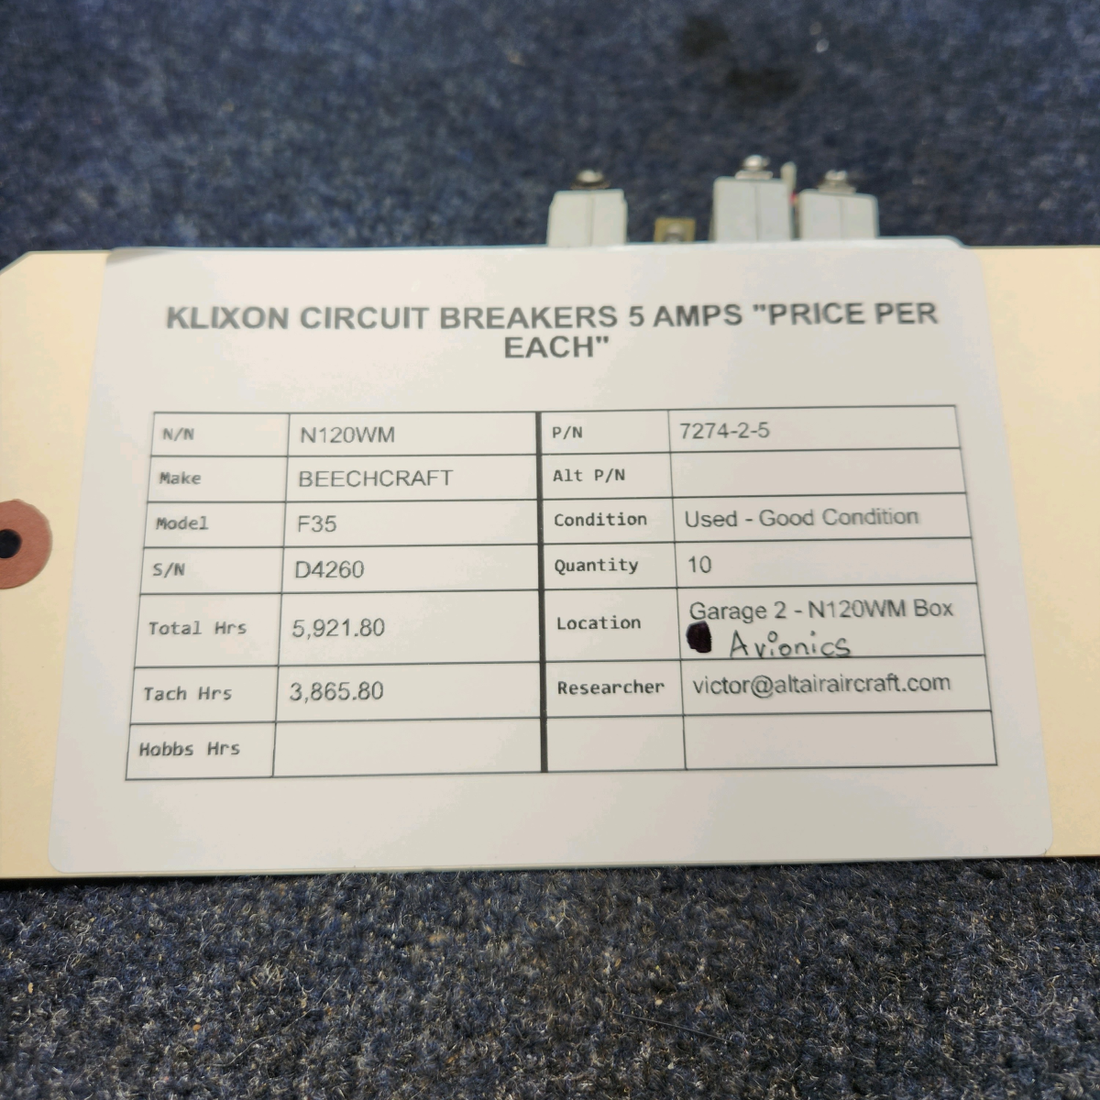 Used aircraft parts for sale, 7274-2-5 BEECHCRAFT F35 KLIXON CIRCUIT BREAKERS 5 AMPS "PRICE PER EACH"